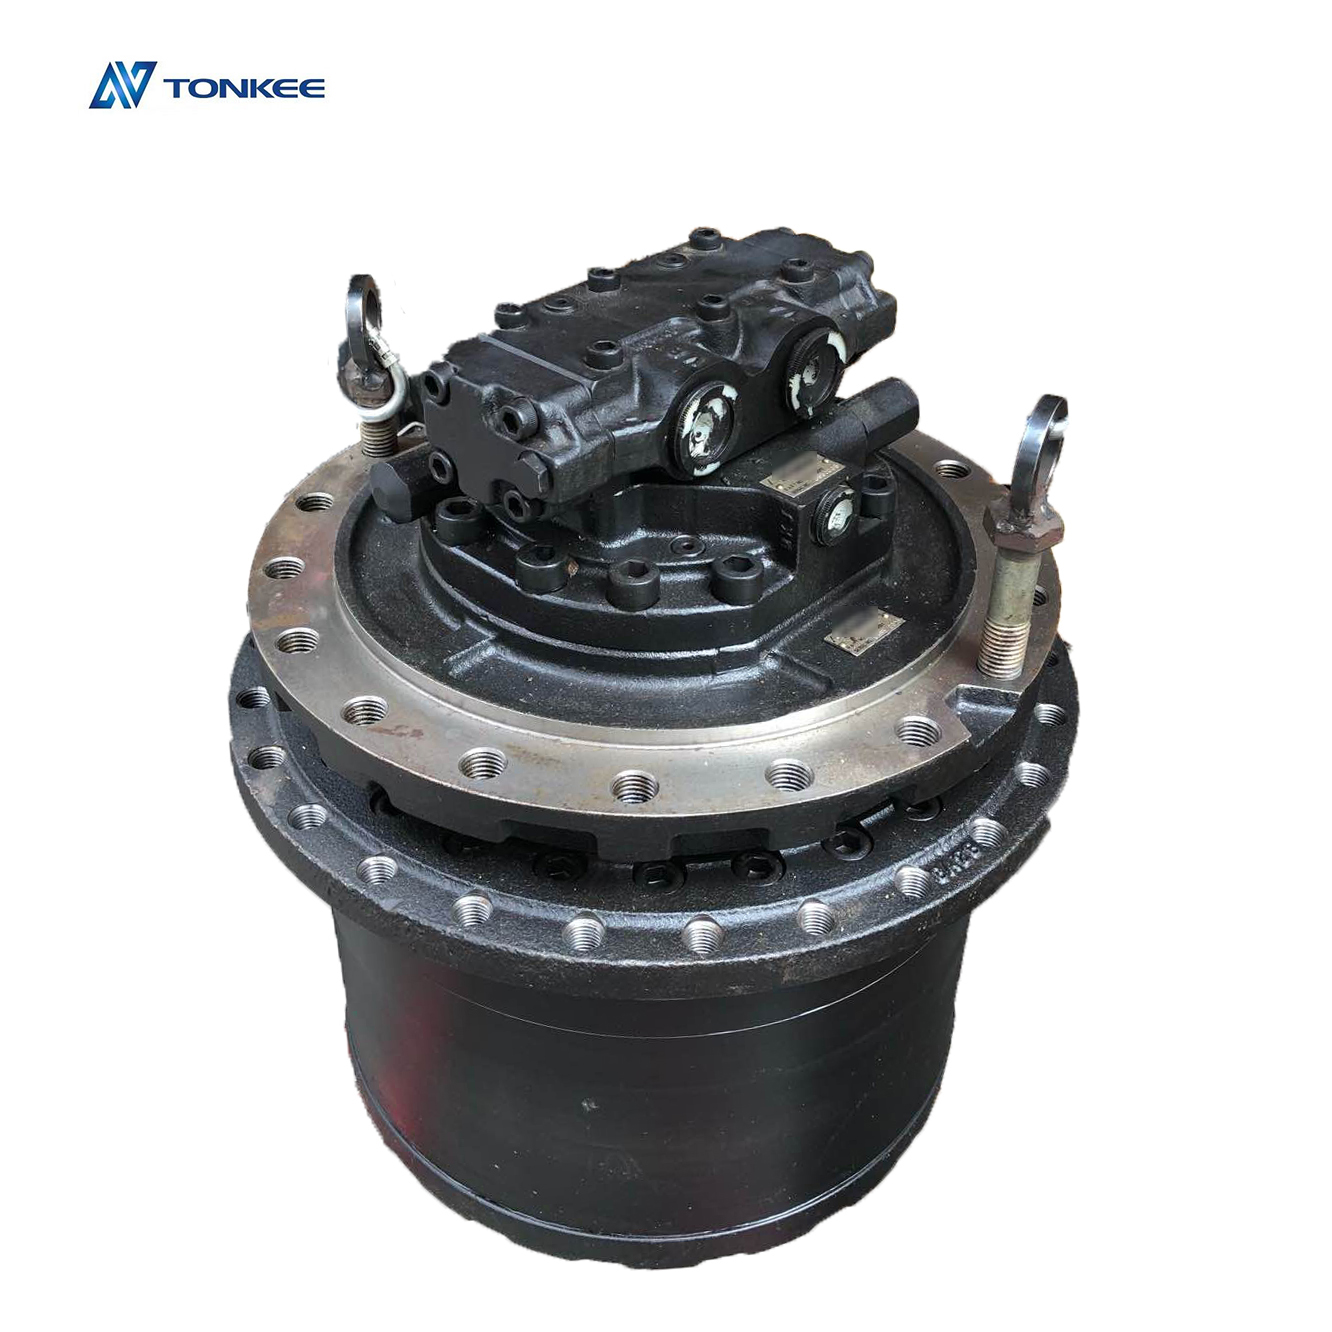 NEW 31N8-40011 final drive R305LC-7 travel motor assy R305-7 travel motor assy for HYUNDAI excavation